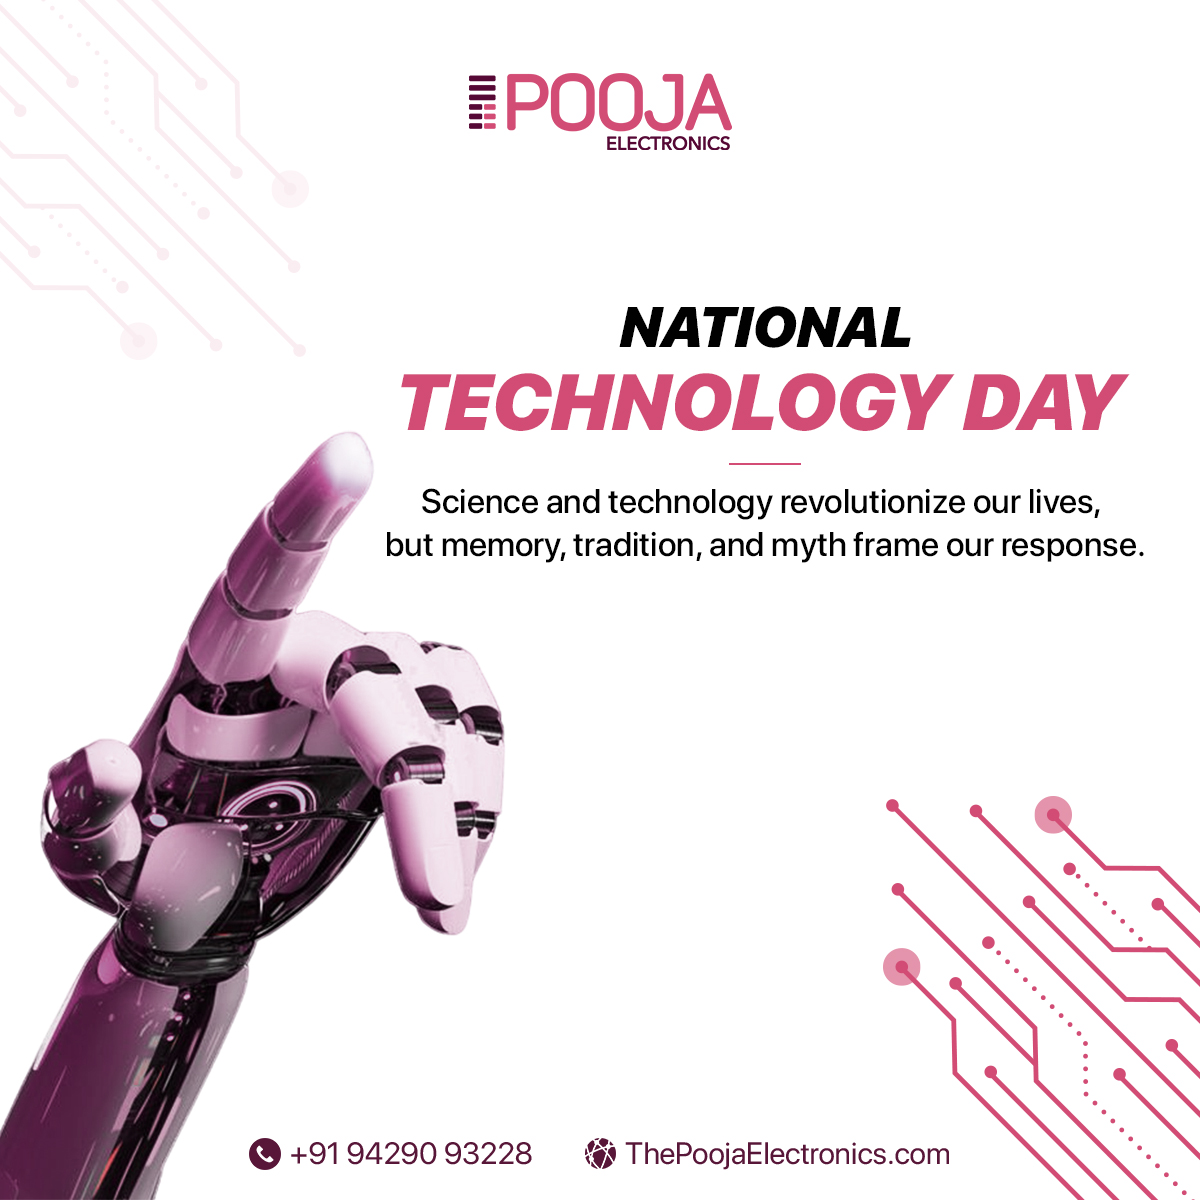 Science and technology revolutionize our lives, but memory, tradition, and myth frame our response.
.
#poojaelectronics #NationalTechnologyDay #technology #science #acremote #caraudioremote #SeamlessConnectivity #DigitalEntertainment #connectivity #homeentertainment